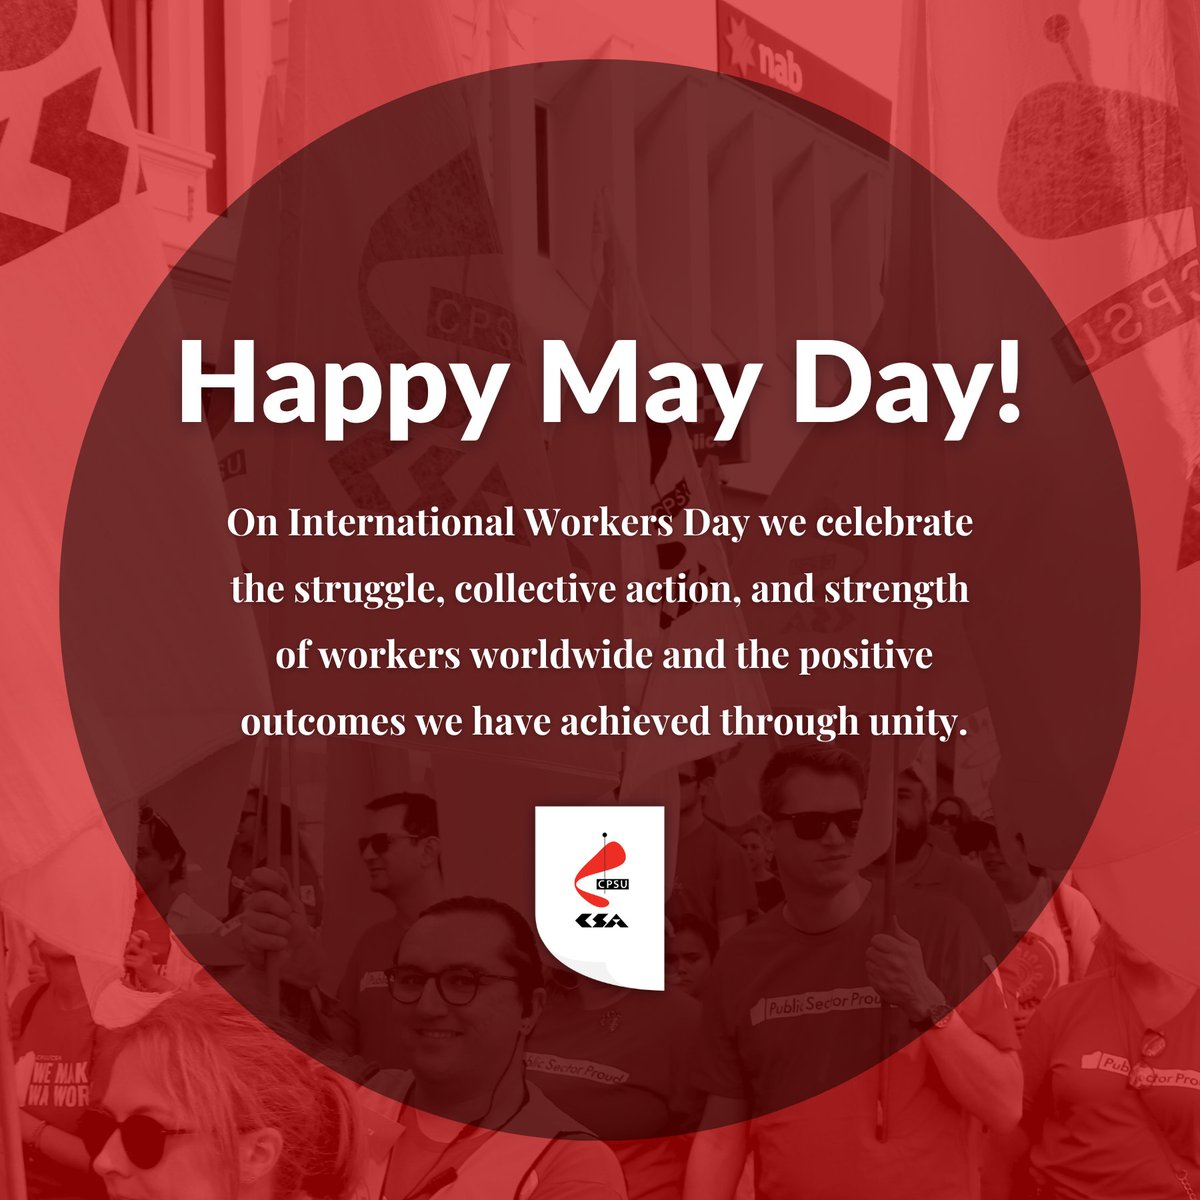 Today we celebrate workers worldwide, who have fought & continue to fight for fair pay, better conditions & safer workplaces. Thank you to our members & delegates for the important part you play in this proud history of making work life better for all!✊❤️ #IWD2024 #MayDay2024